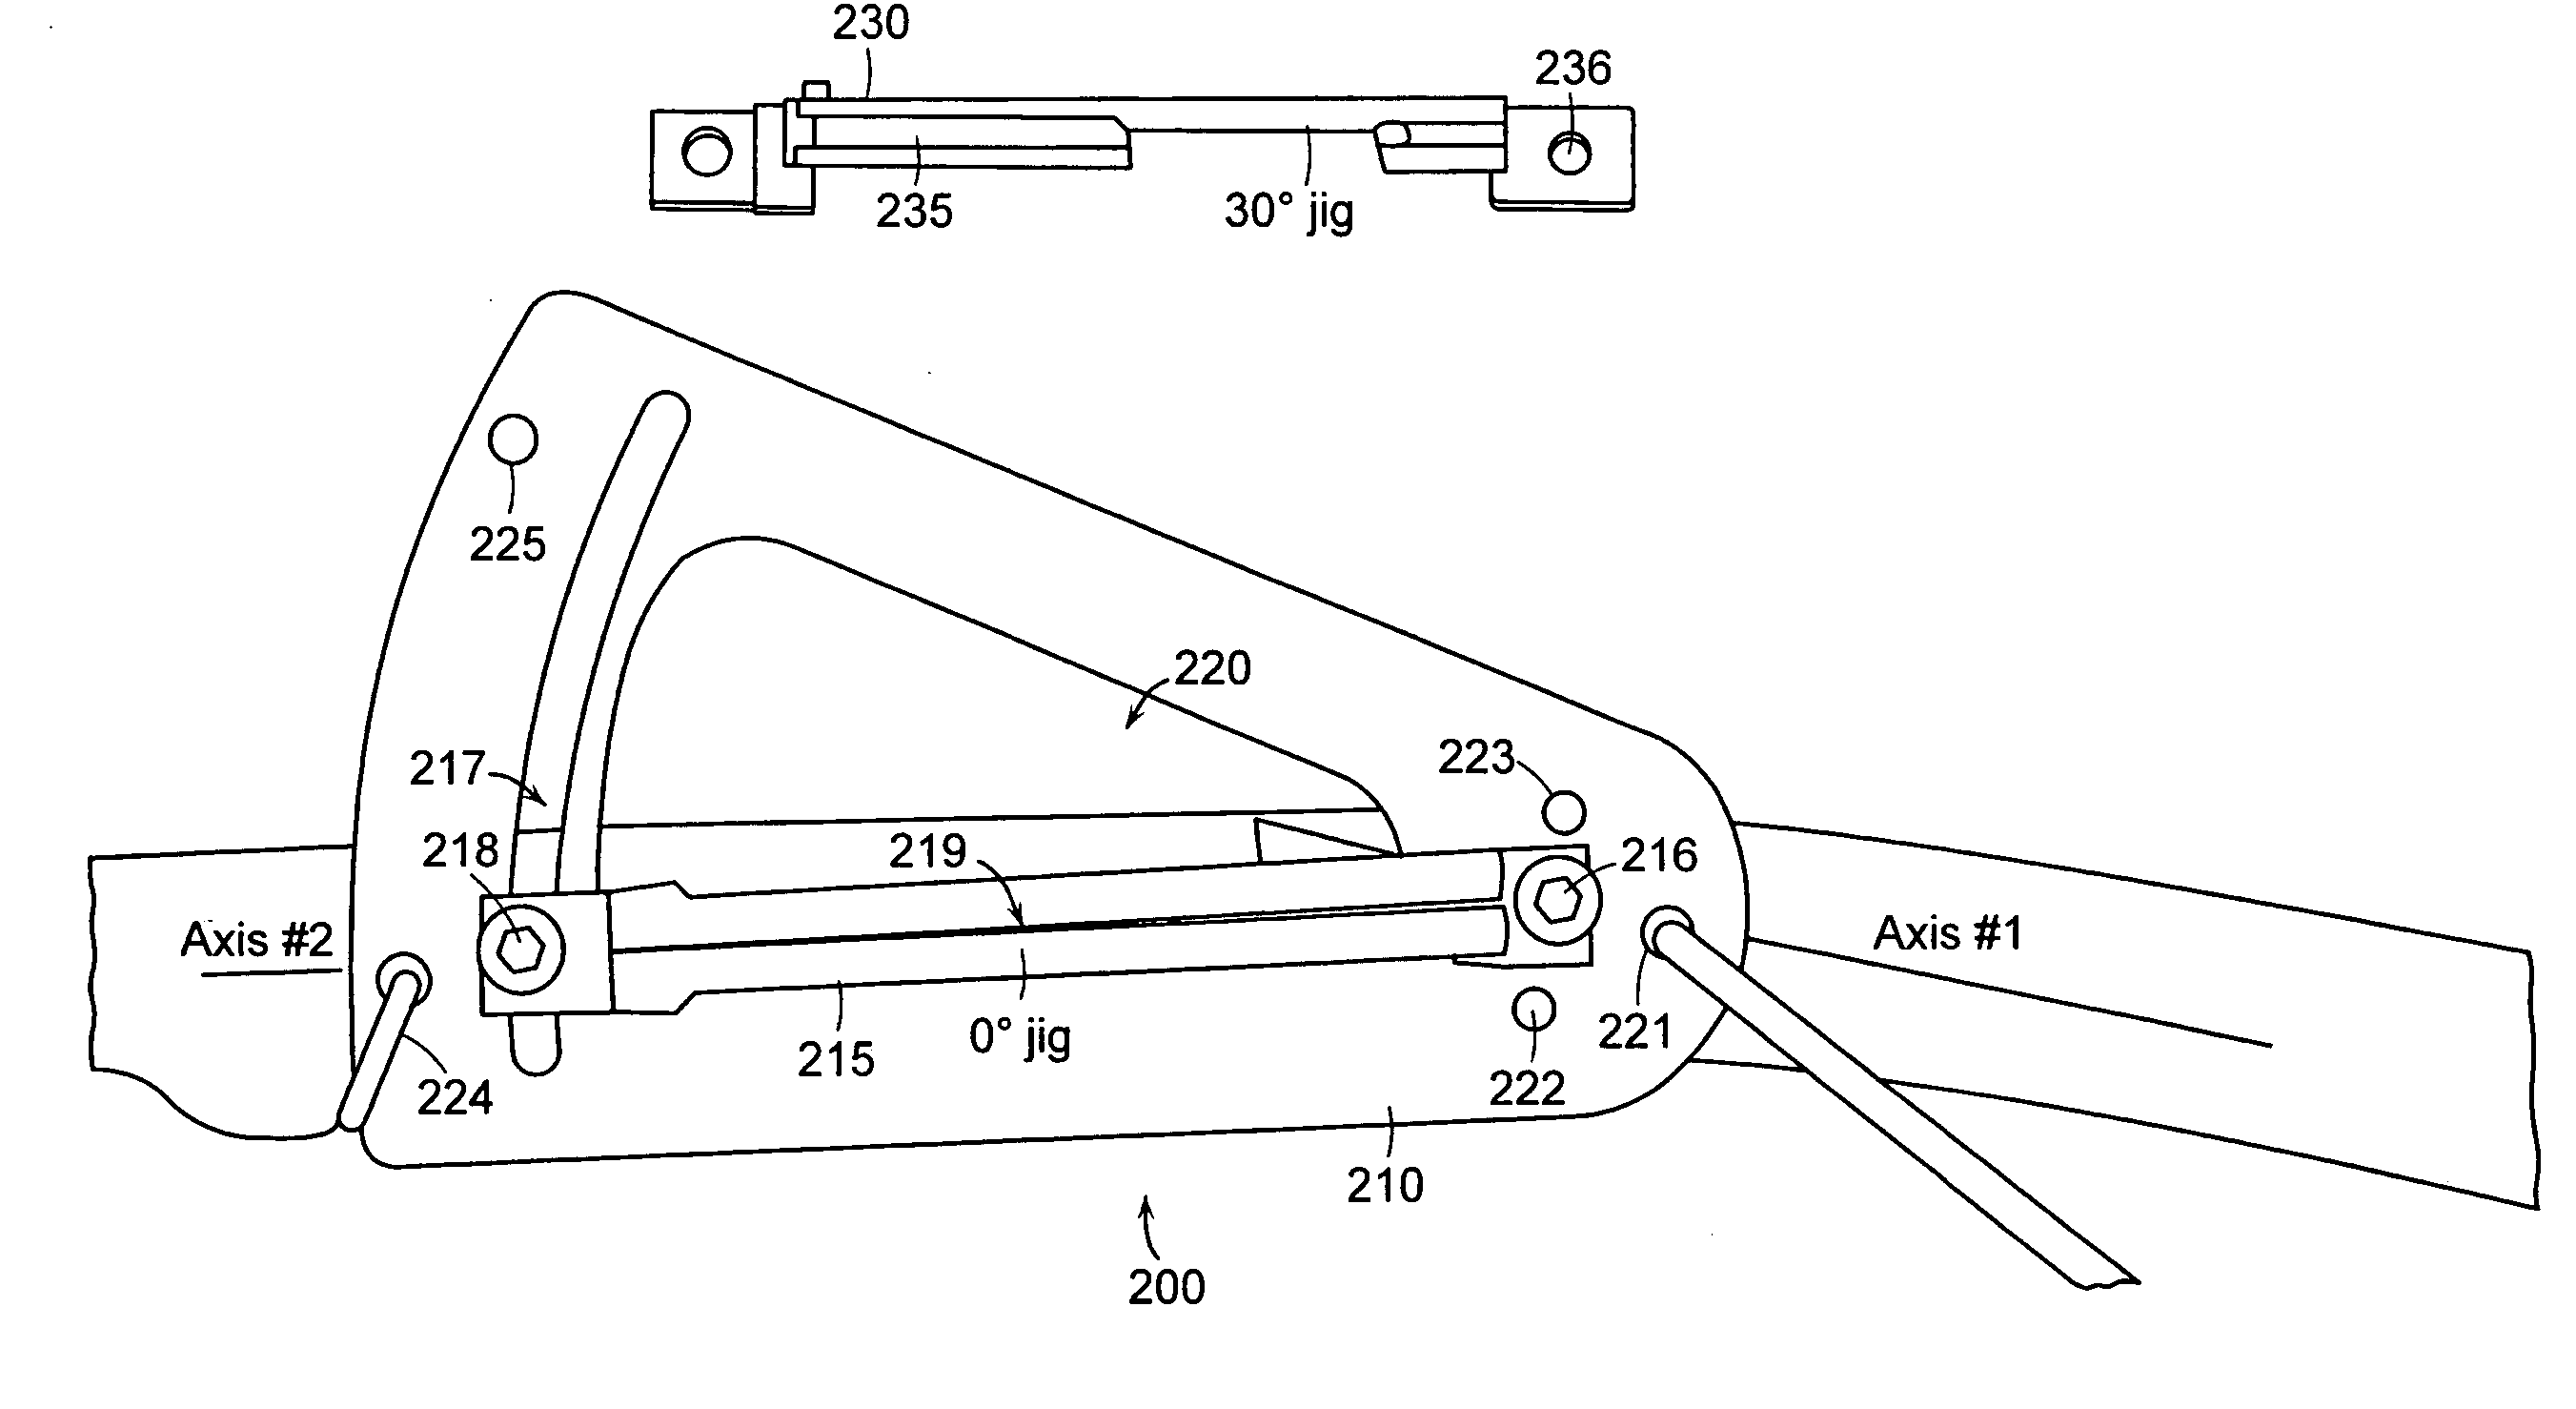 Three-dimensional osteotomy device and method for treating bone deformities